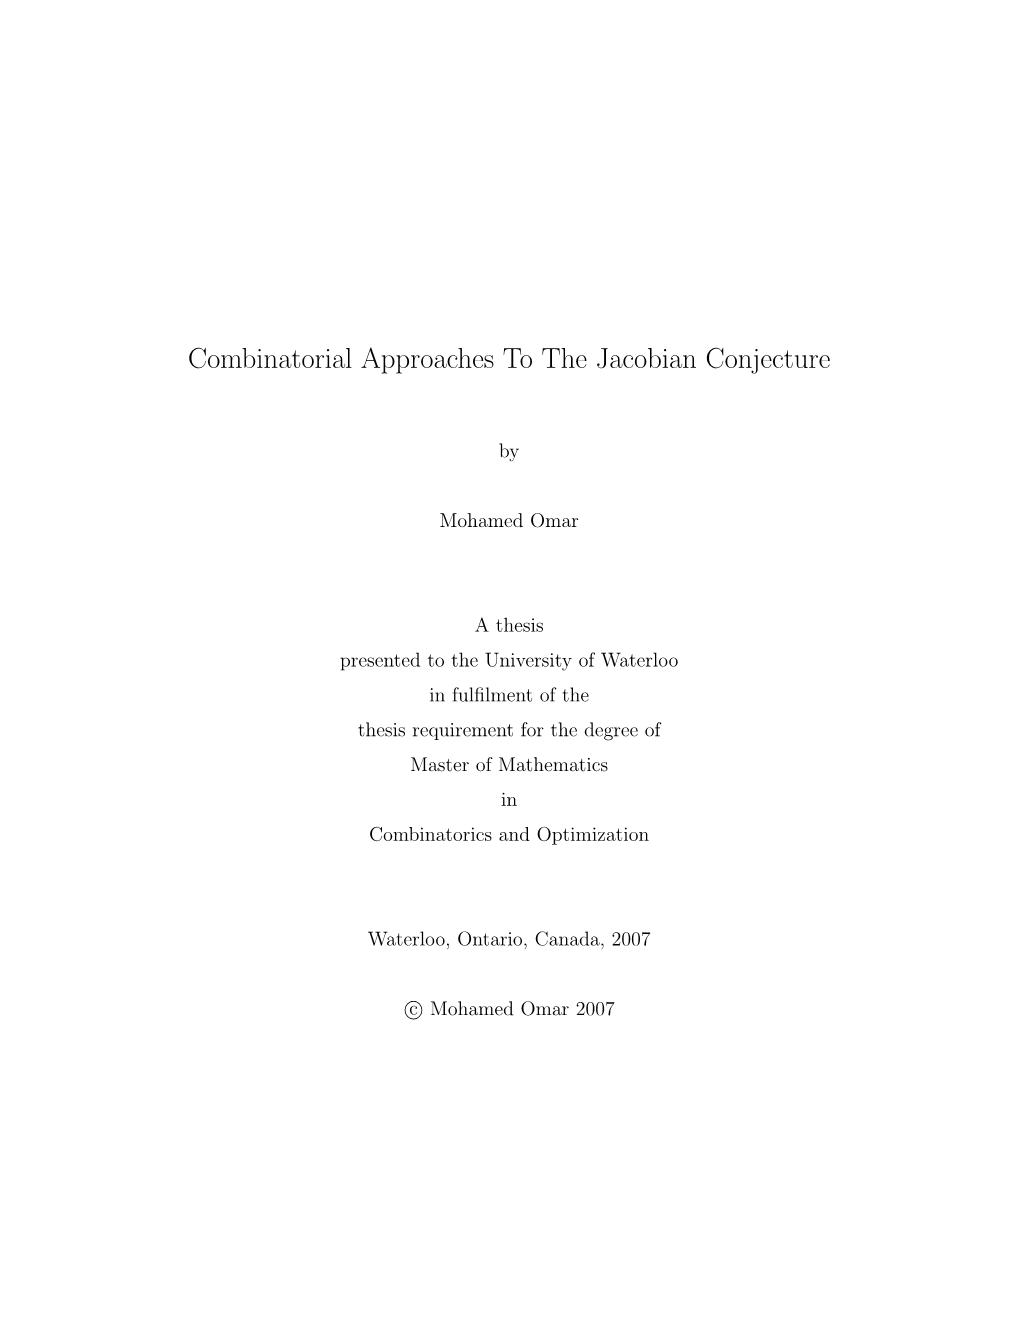 Combinatorial Approaches to the Jacobian Conjecture